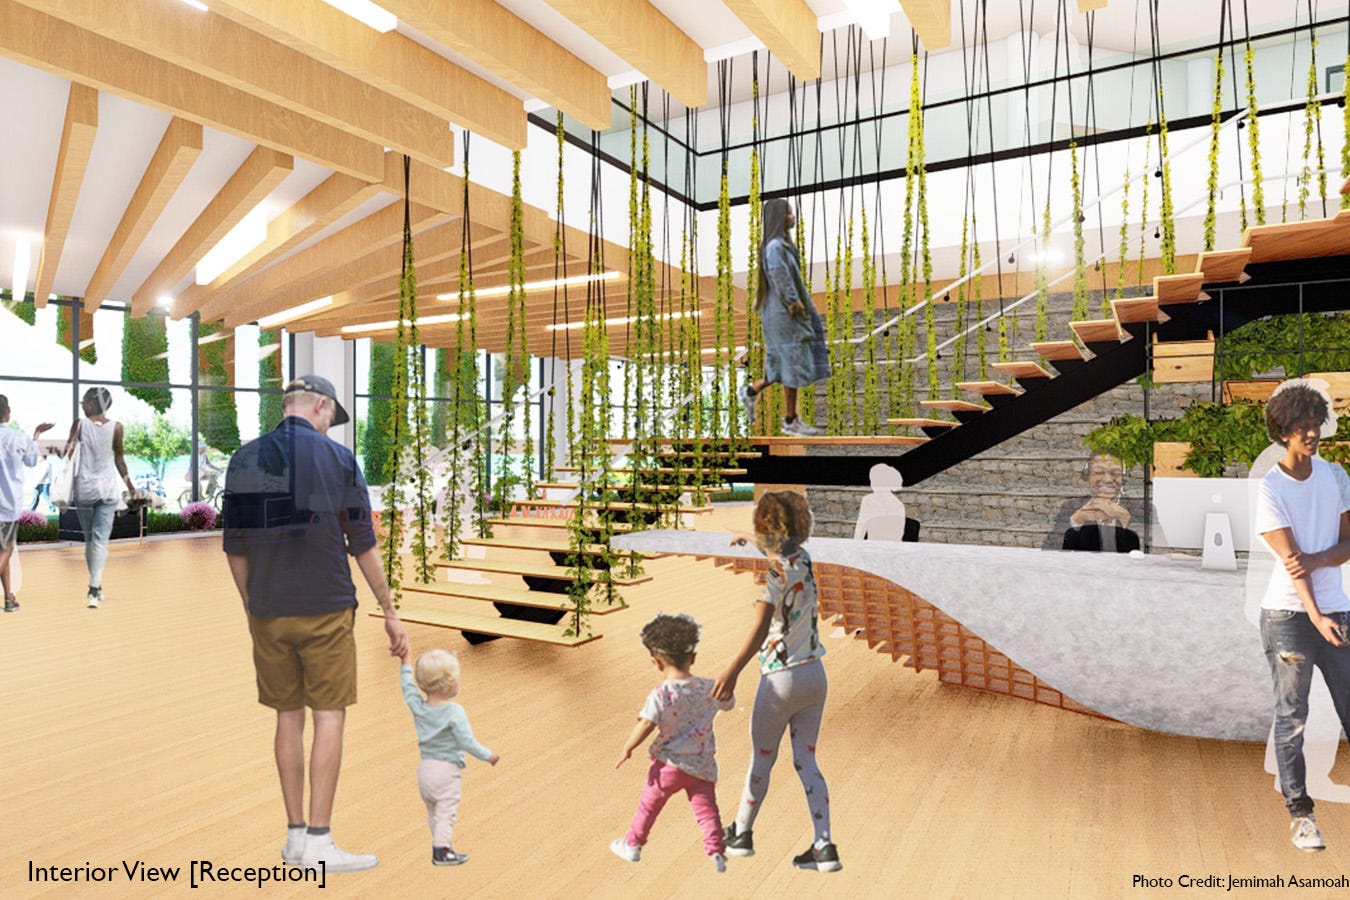 Interior lobby with floating stair and people, with plants growing on walls and railings.